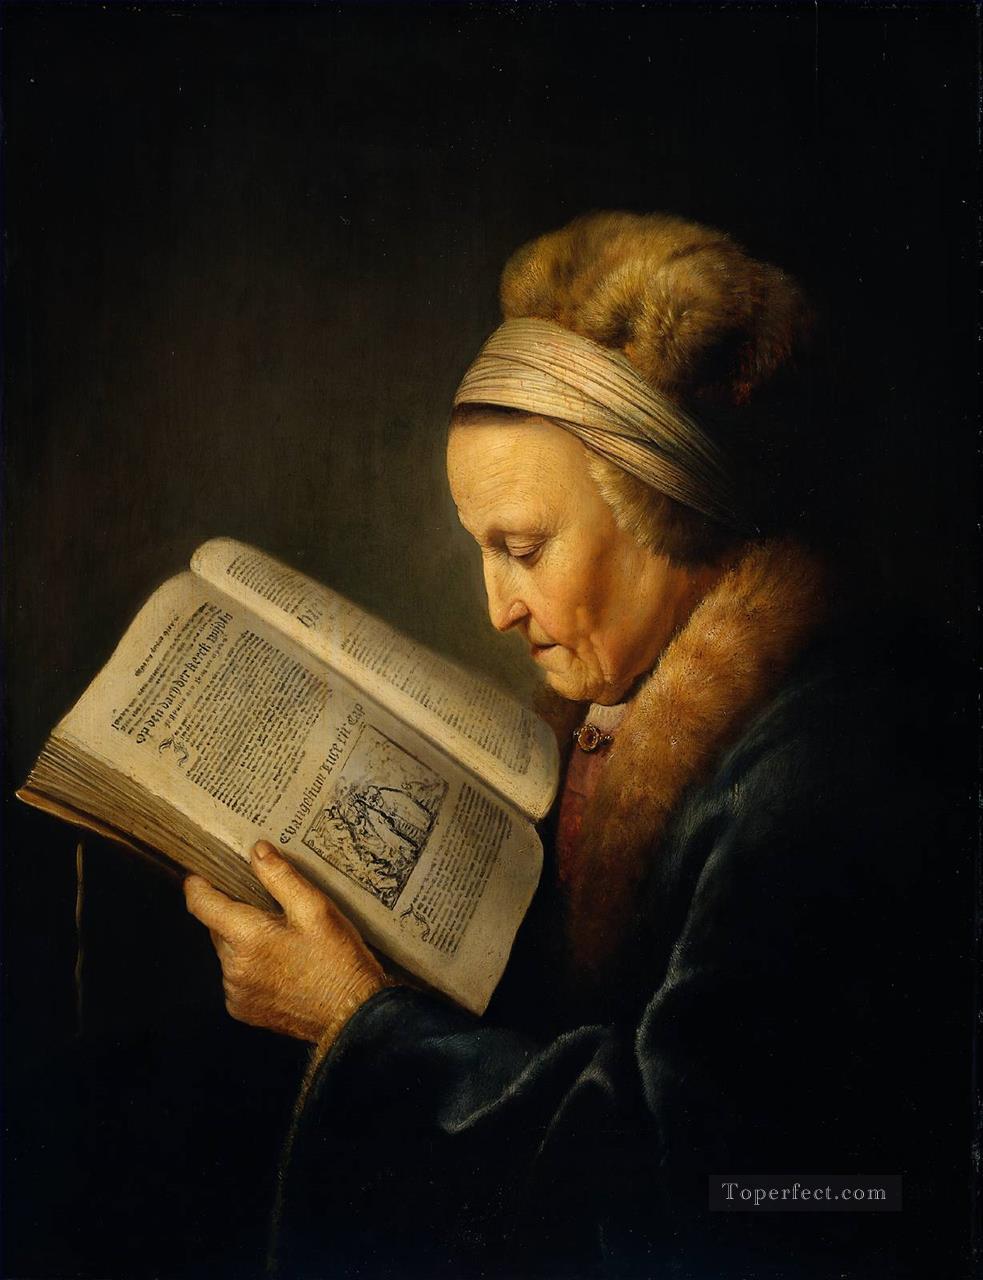 5-Old-Woman-Reading-a-Lectionary-Golden-Age-Gerrit-Dou.jpg (983×1280)